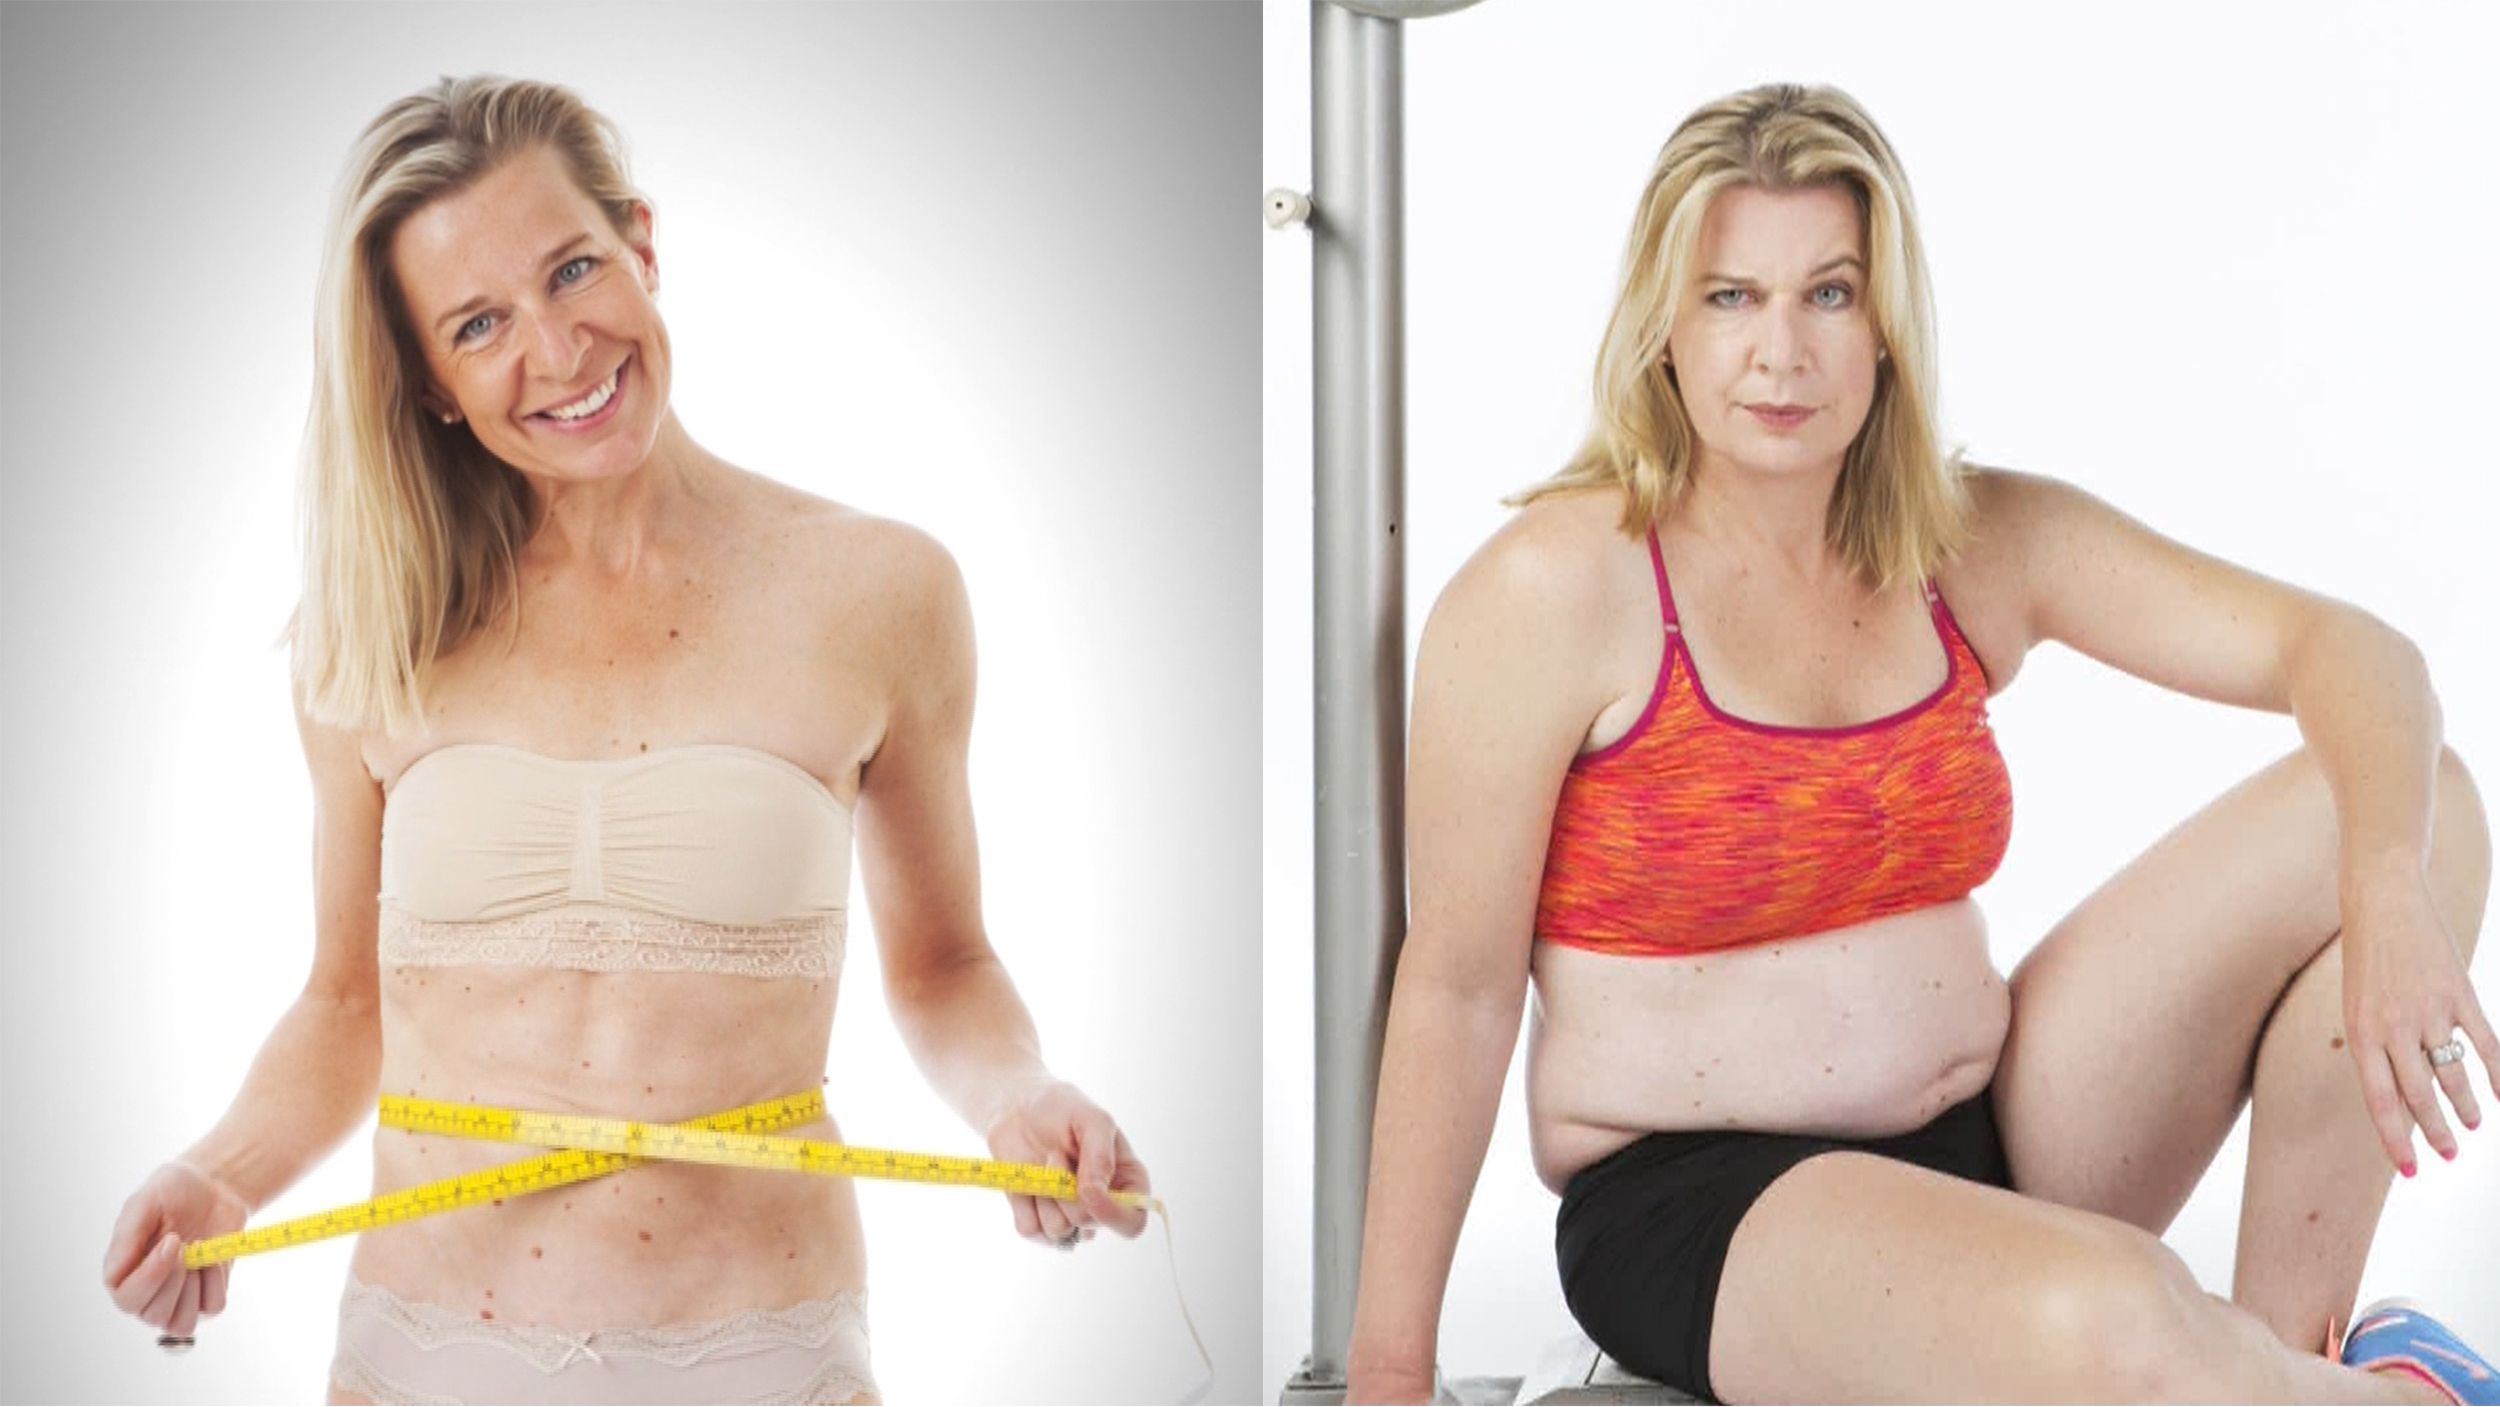 Woman packs on 50 pounds to prove 'no excuses for being overweight' - TODAY.com2500 x 1407